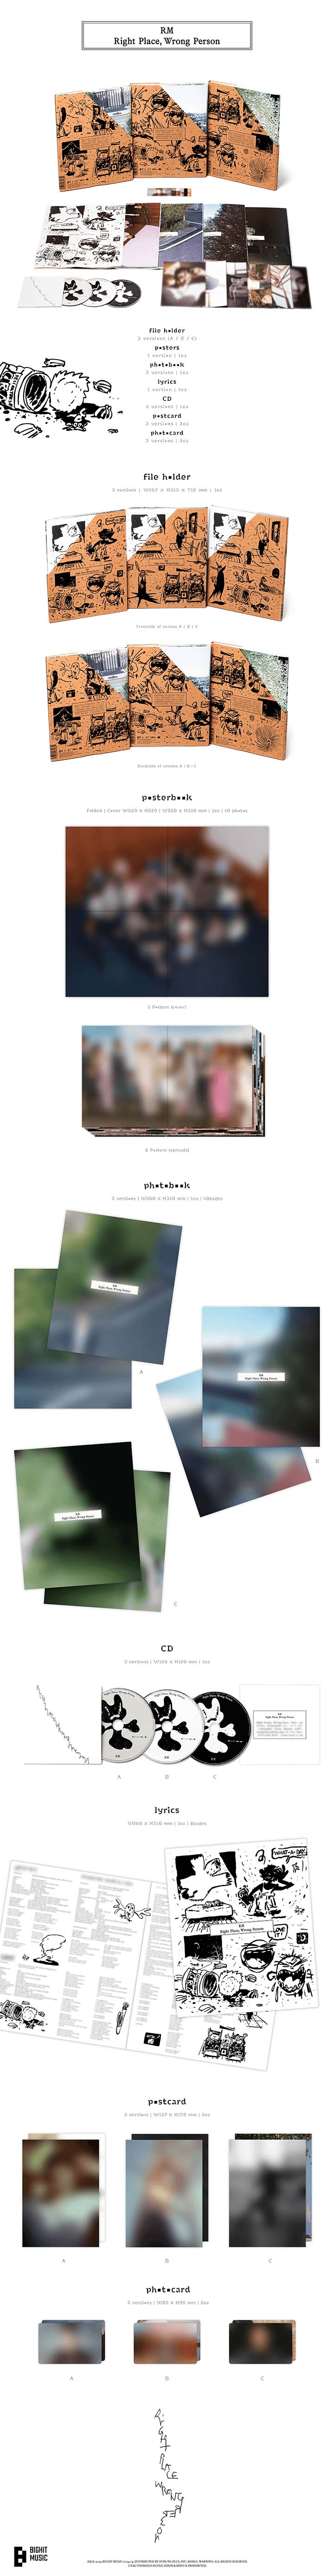 [EARLY BIRD] [WEVERSE] RM(BTS) 'RIGHT PLACE, WRONG PERSON' (SET) + WEVERSE ALBUMS SET